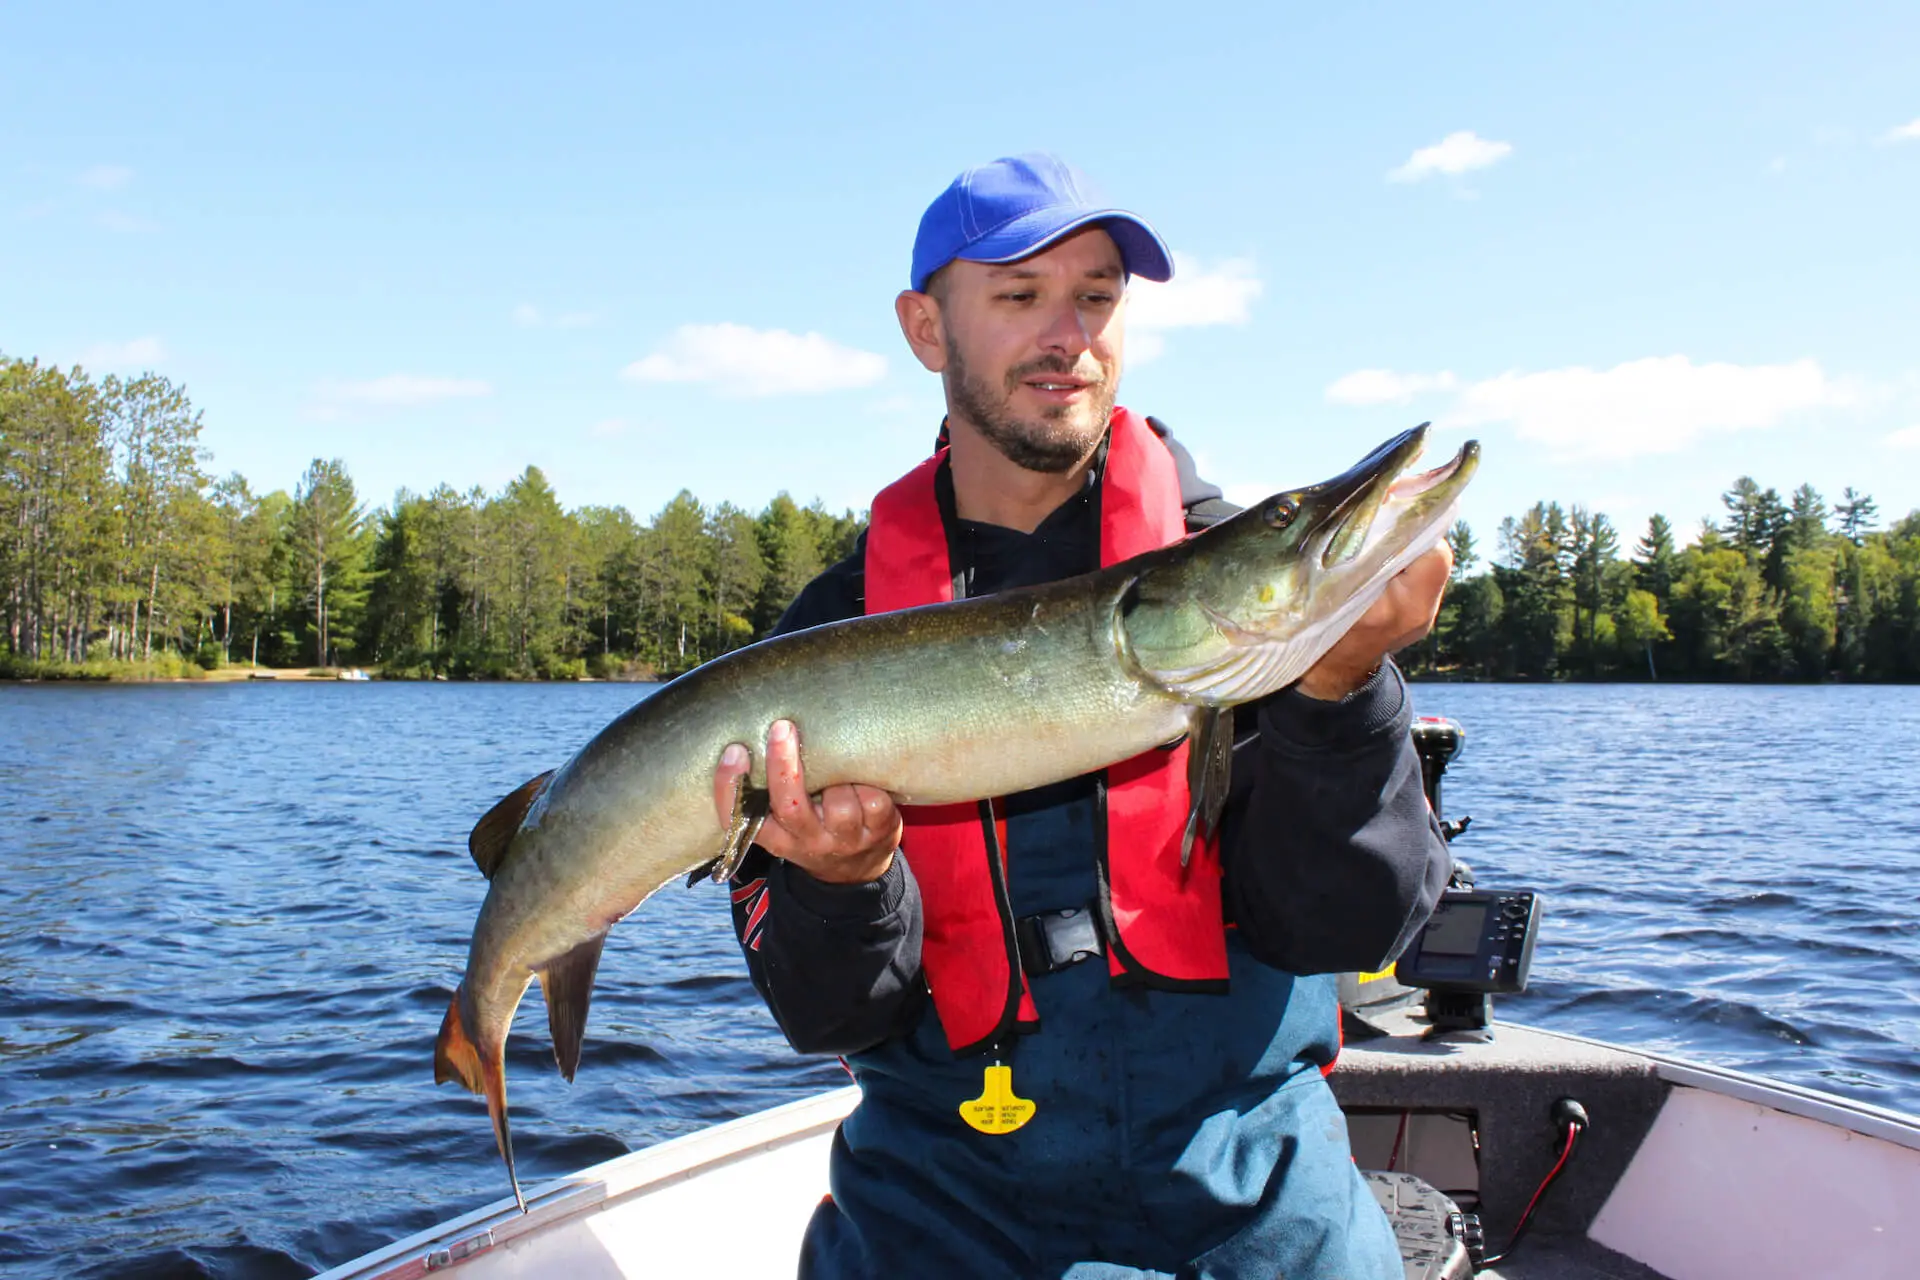 Muskie in the hands of a fisherman on a boat